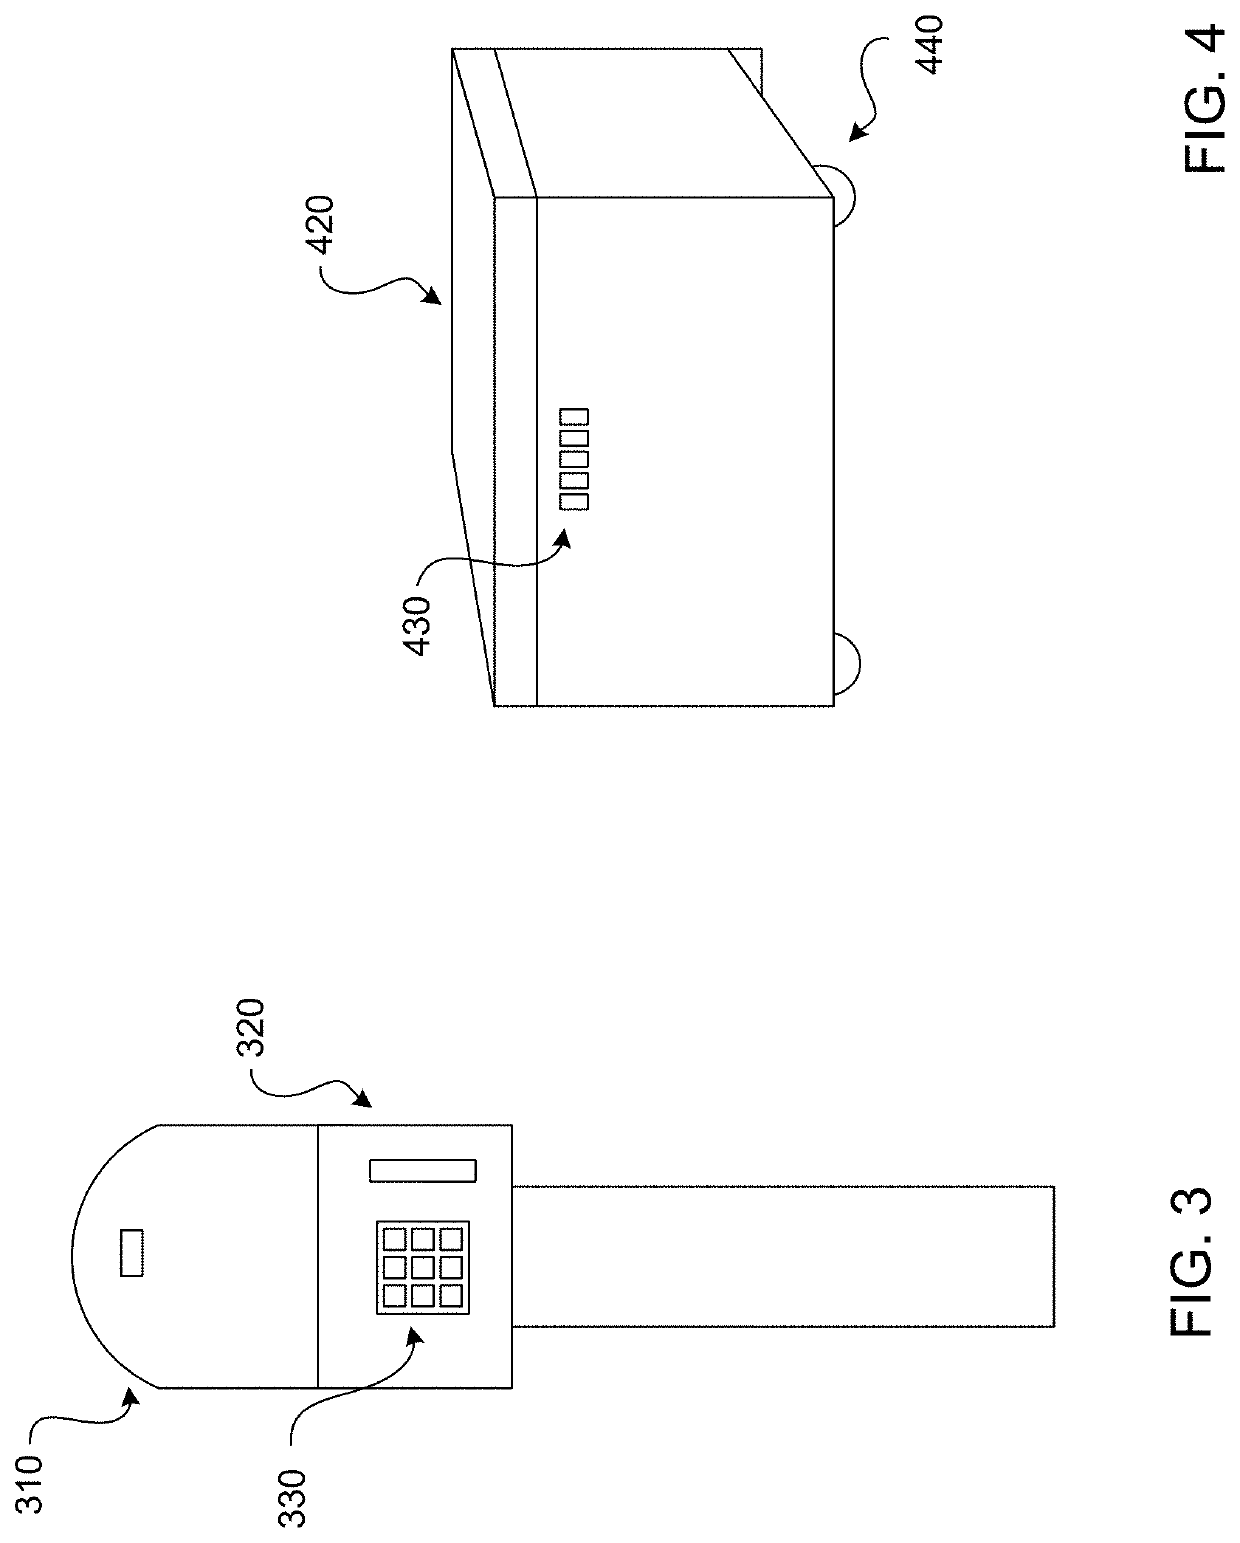 Method and System For Securely Receiving Deliveries